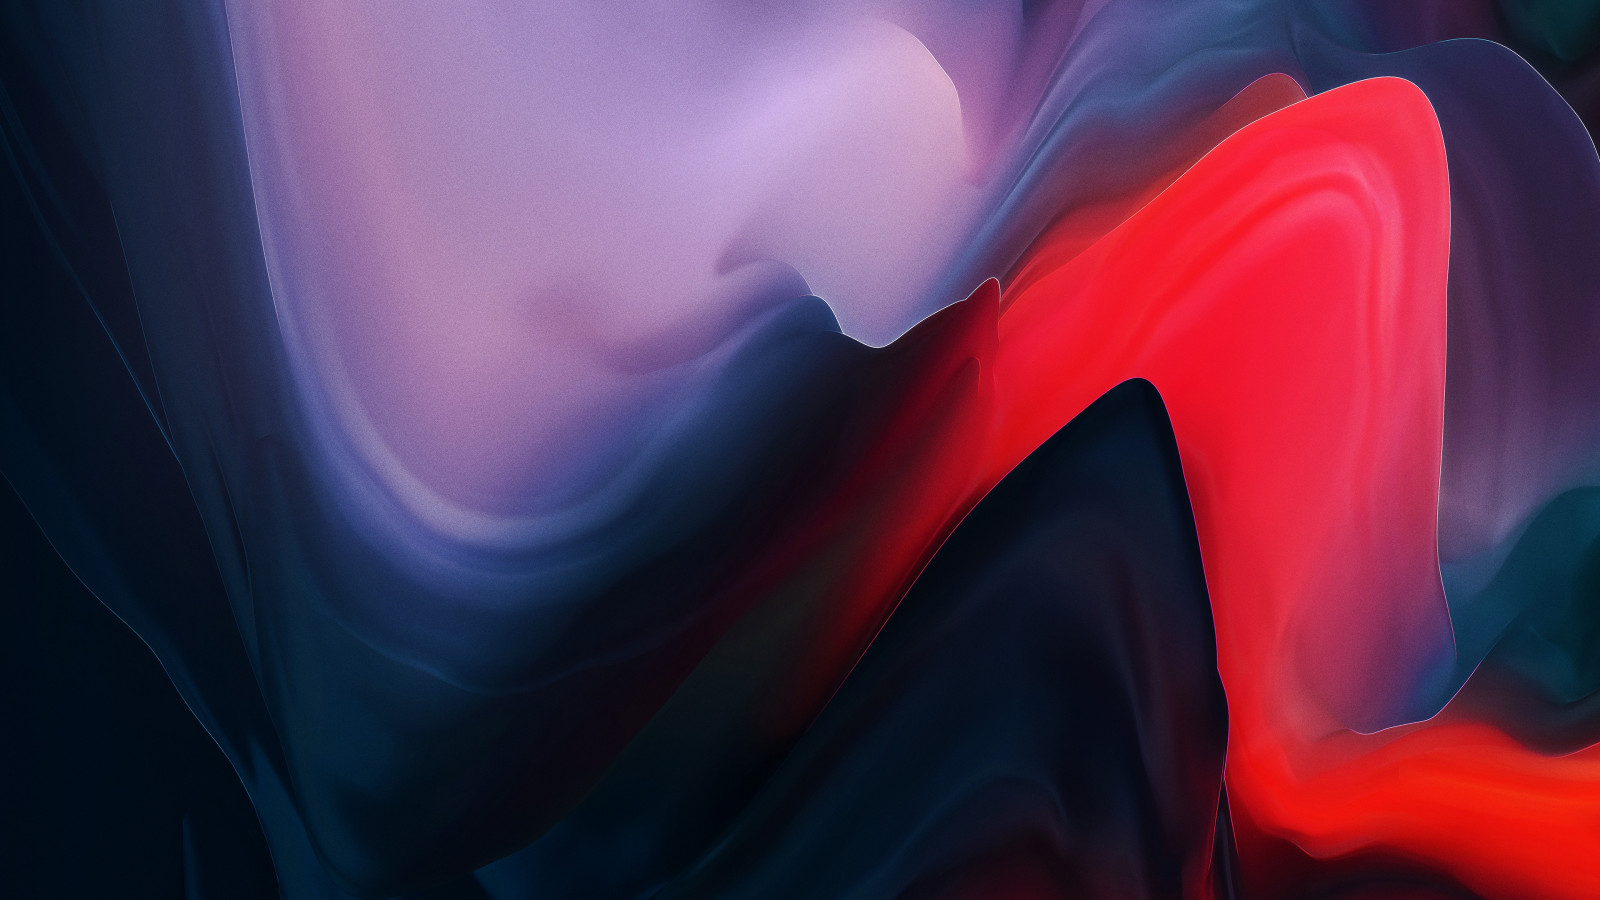 The Abstract from OnePlus 6T wallpaper 1600x900